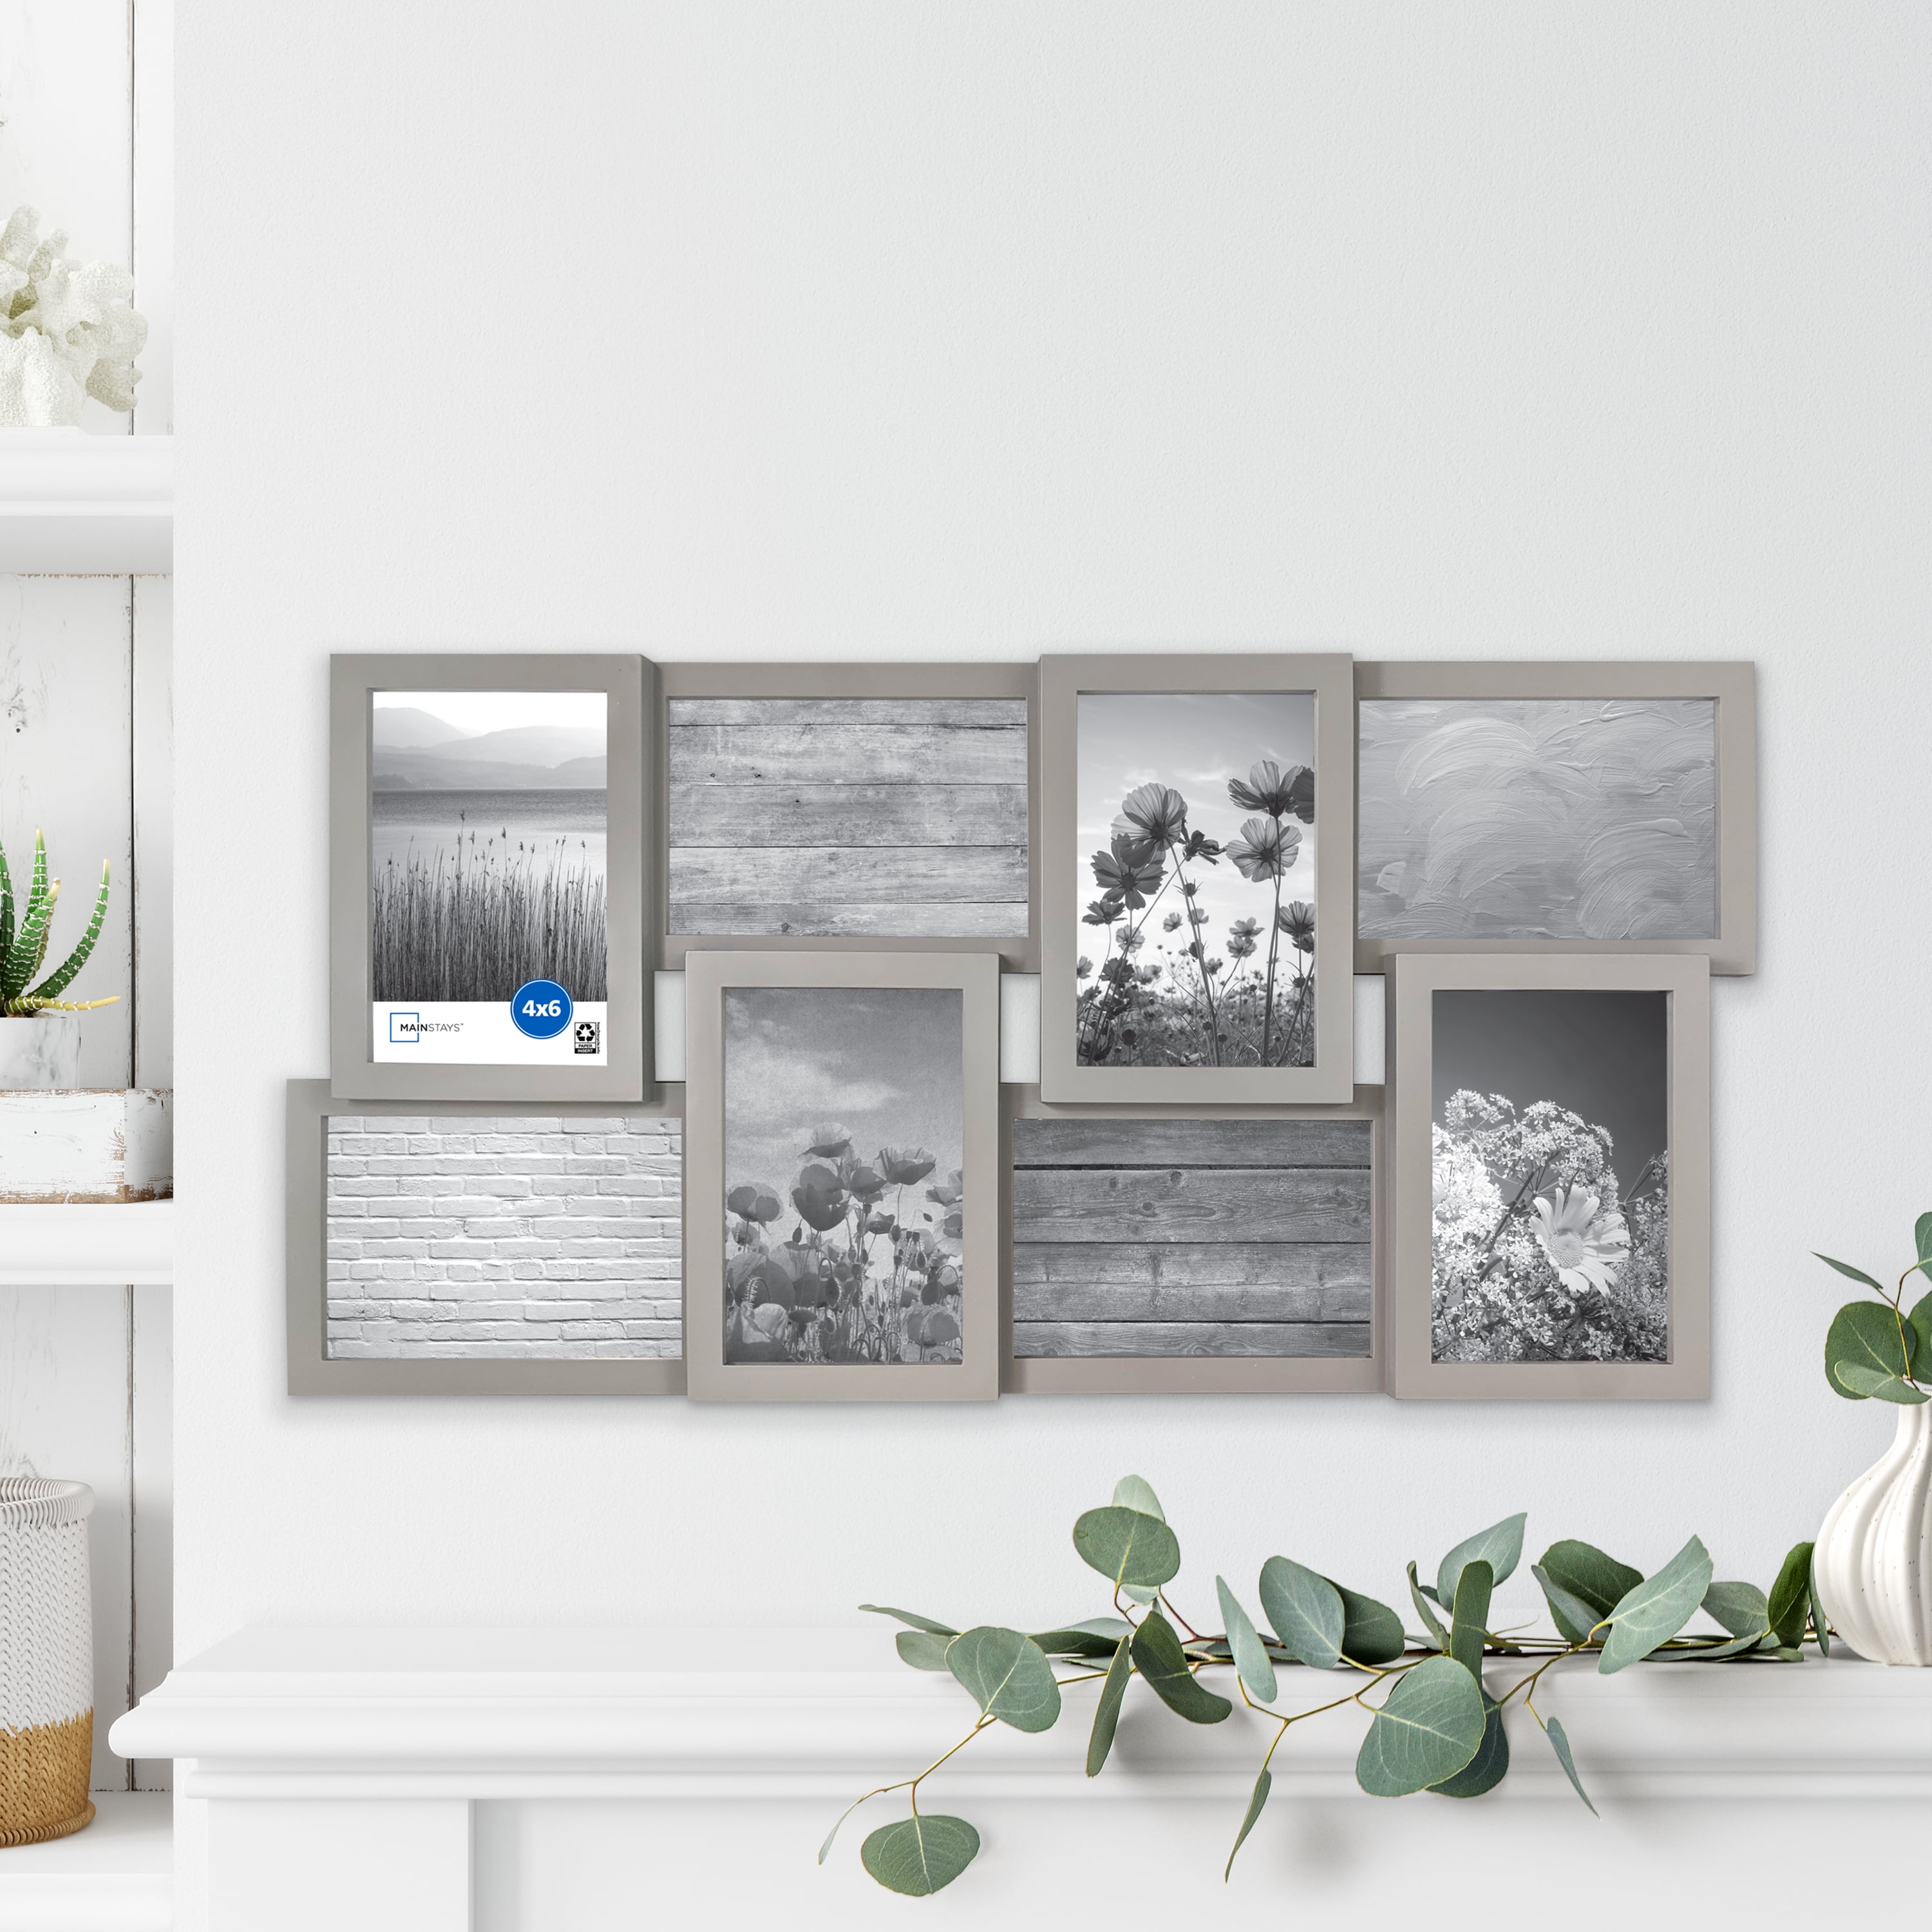 Mainstays 8-Opening 4X6 Linear White Collage Picture Frame